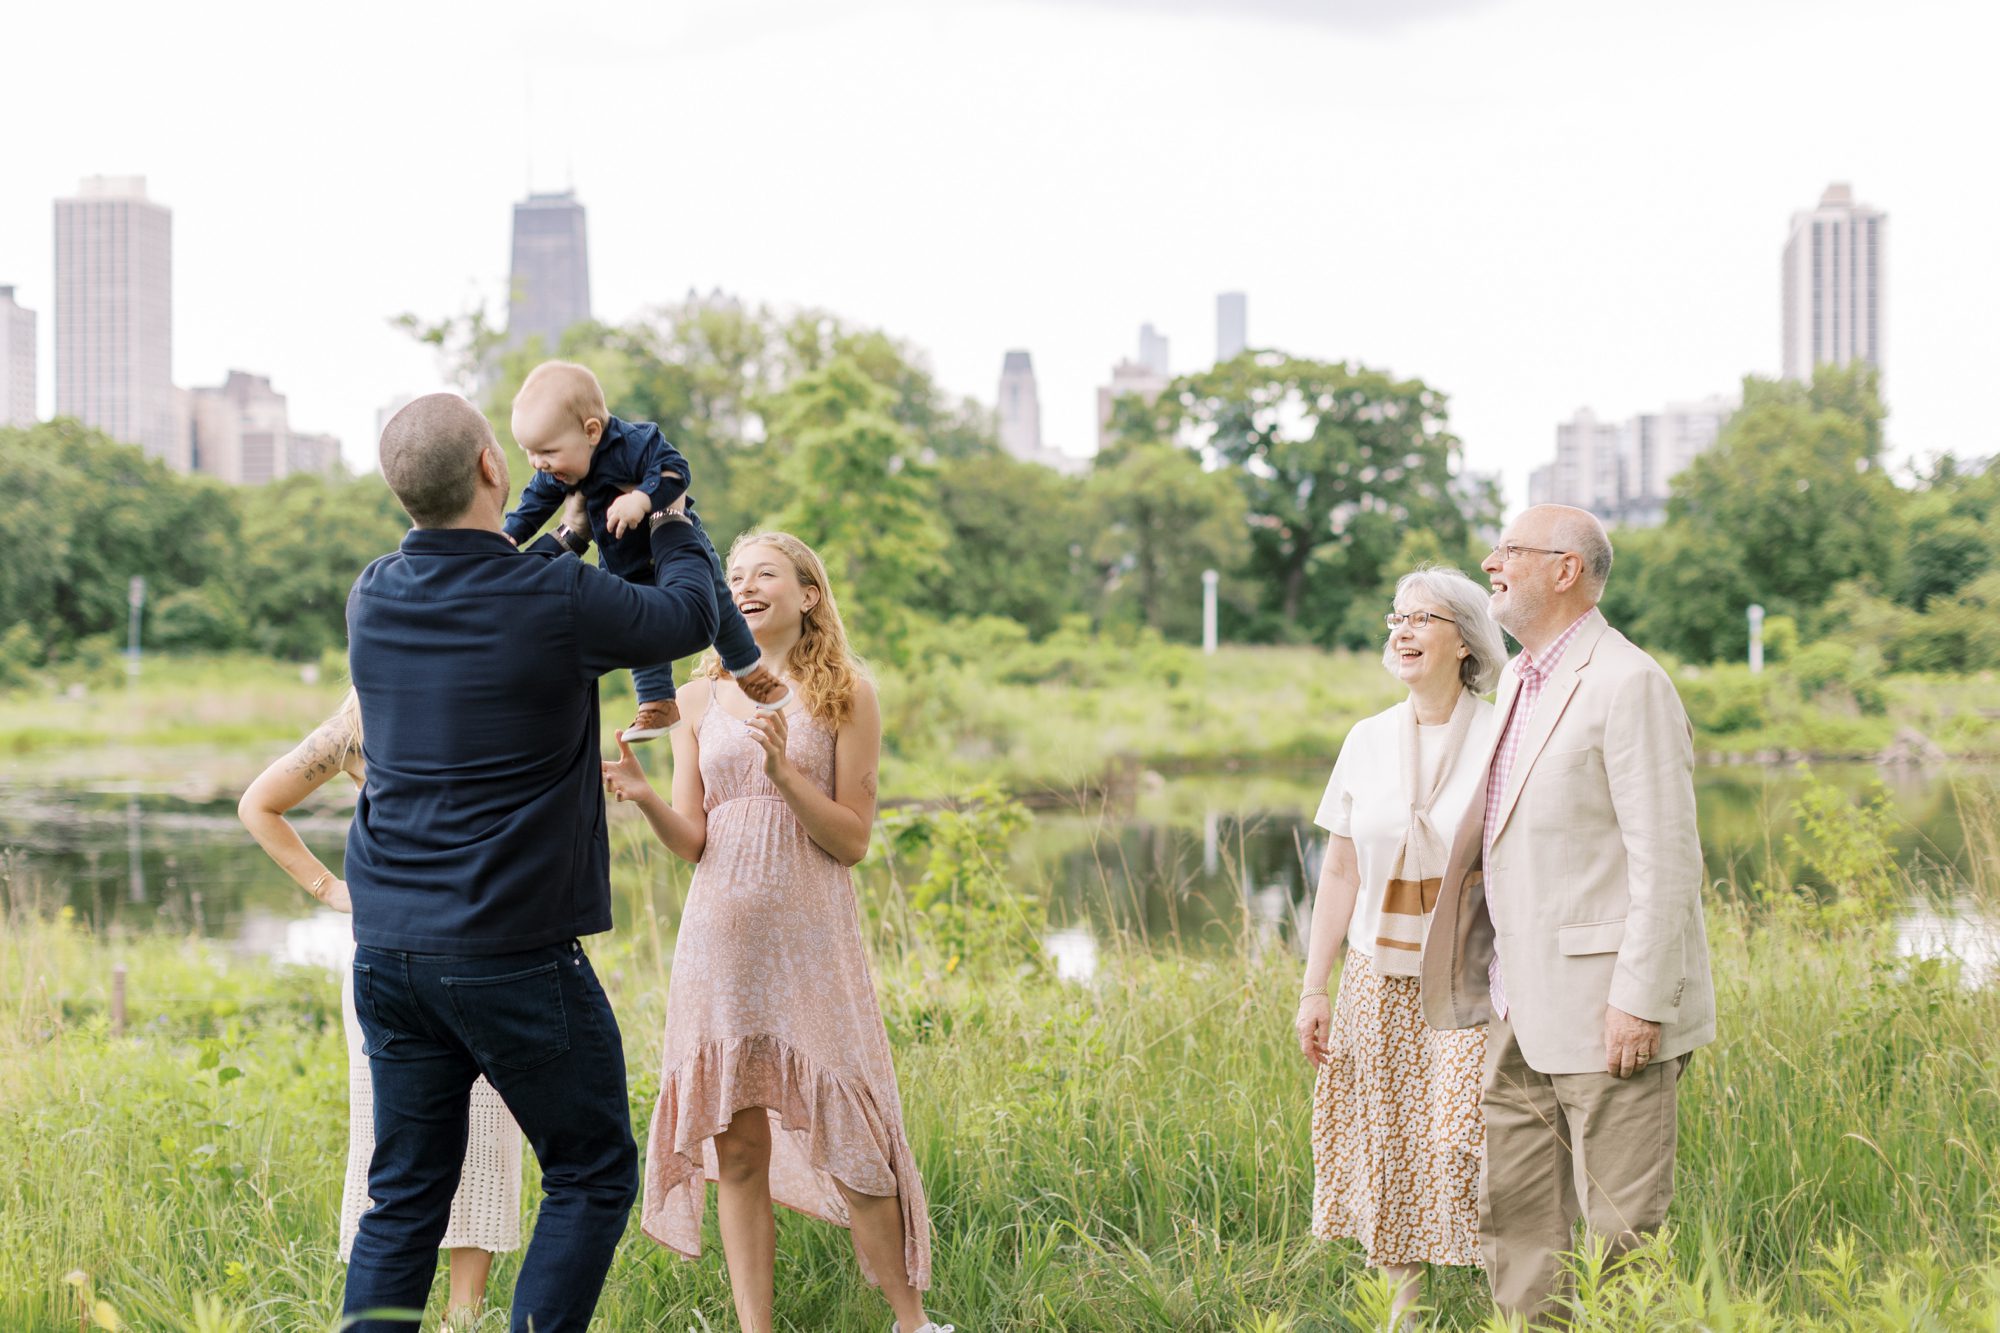 the ideal downtown Chicago family photo location